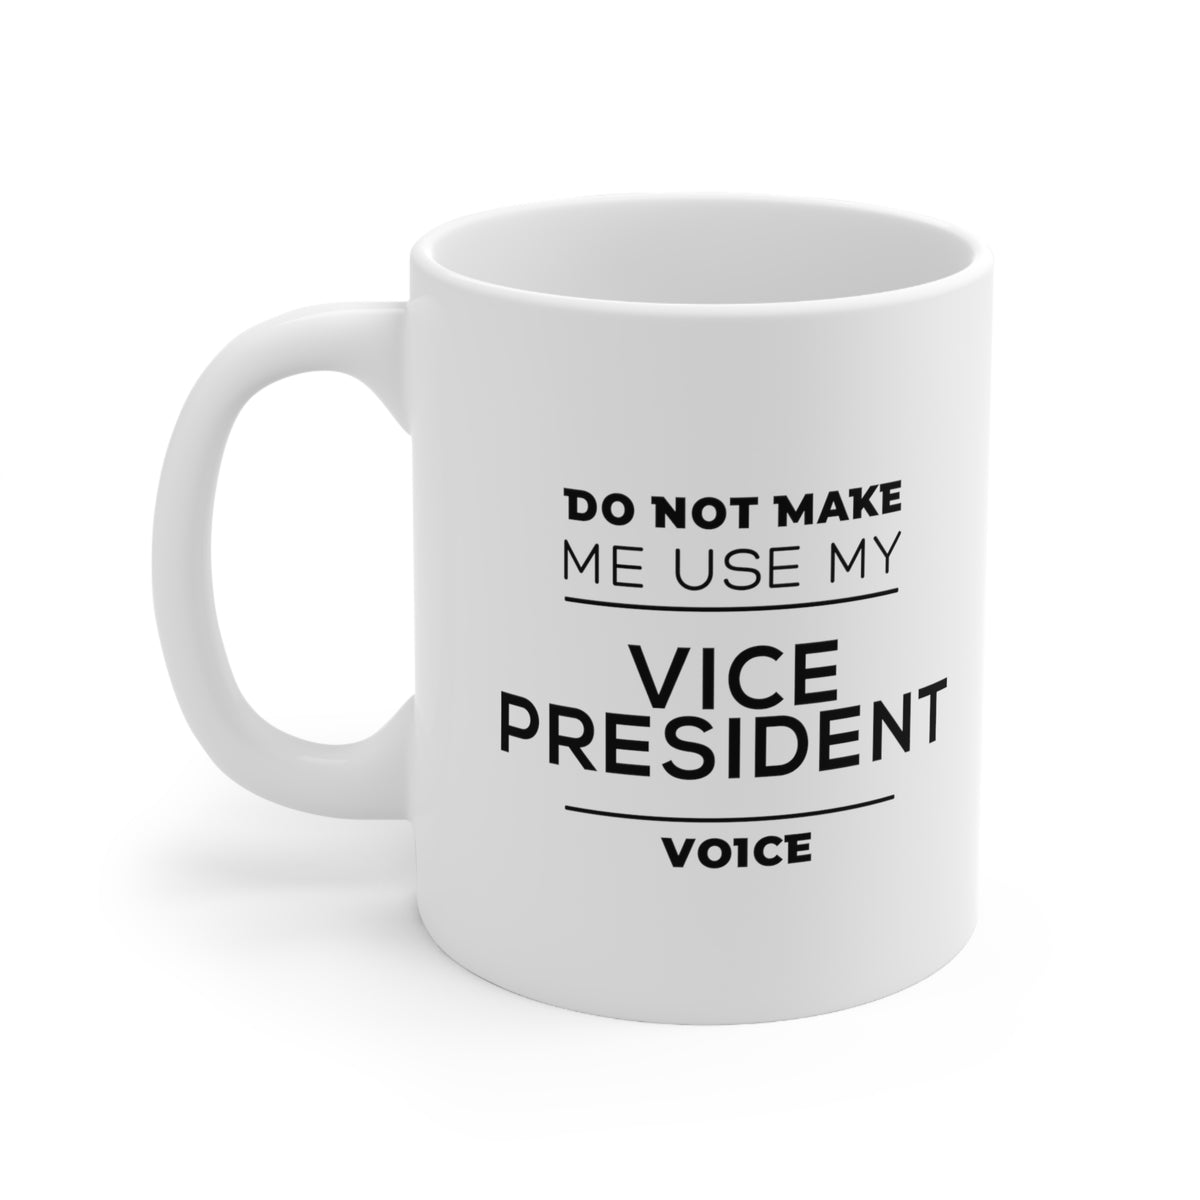 Vice President Coffee Mug - Do Not Make Me Use My Vice President Voice - Unique Funny Inspirational Christmas for Men and Women Coworker